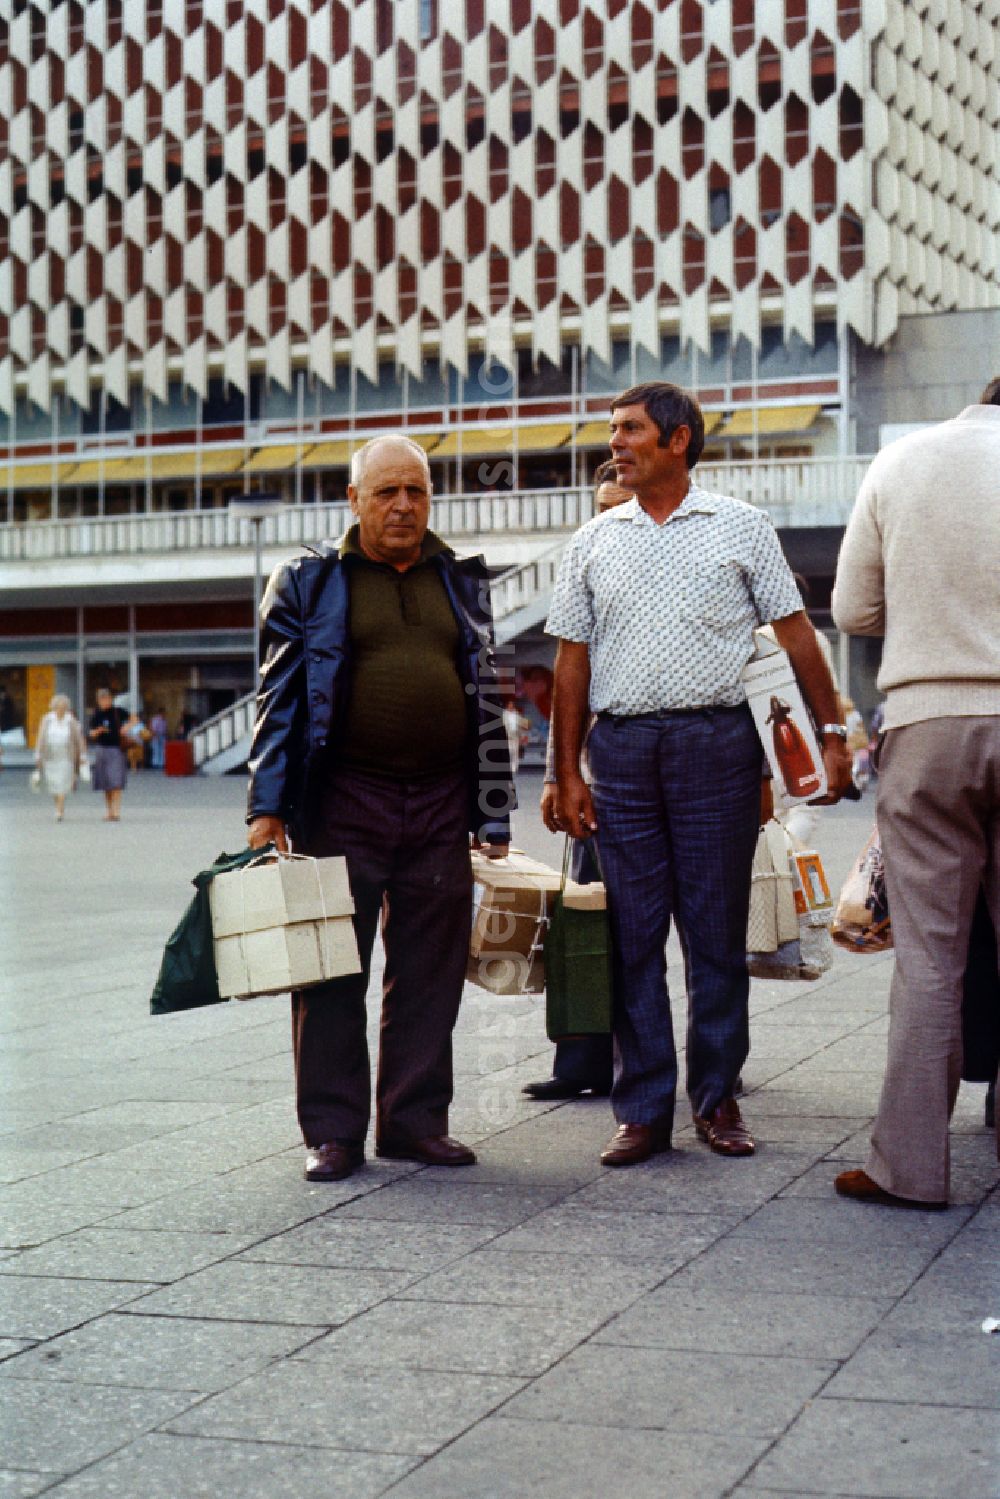 GDR picture archive: Berlin - People on Alexanderplatz in East Berlin in the area of the former GDR, German Democratic Republic